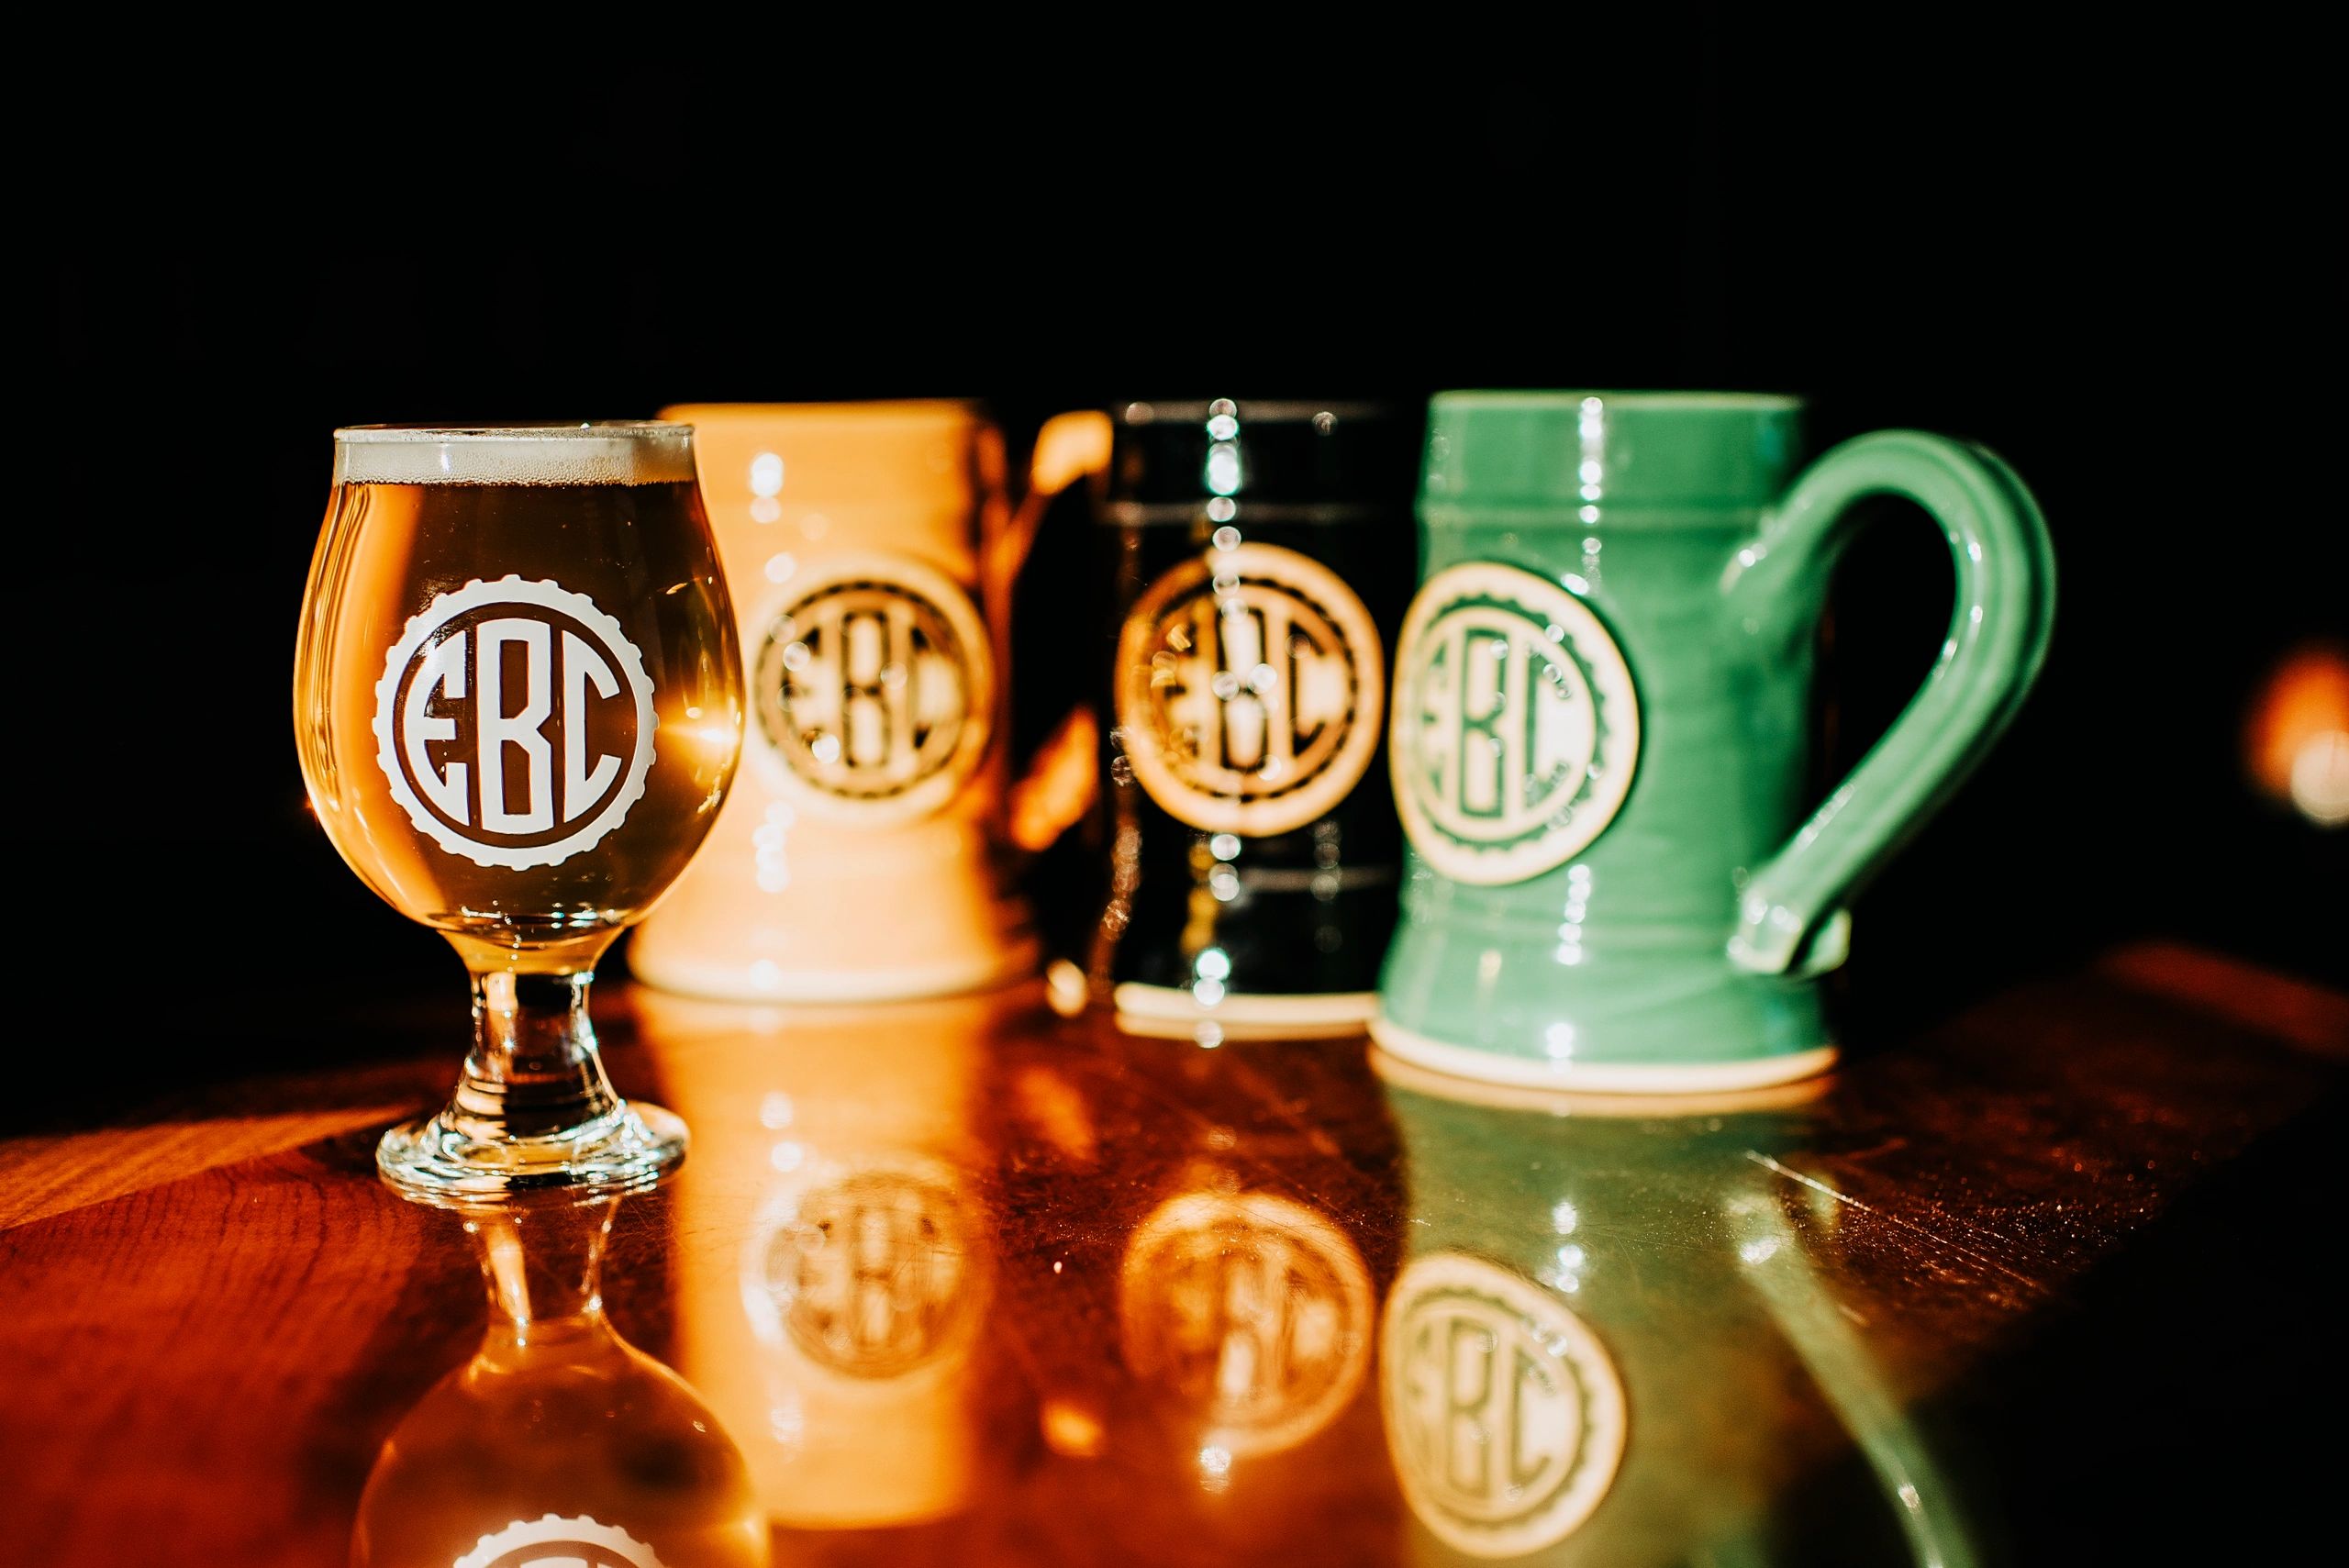 A picture of several EBC mugs and a tulip glass with a light-bodied beer.